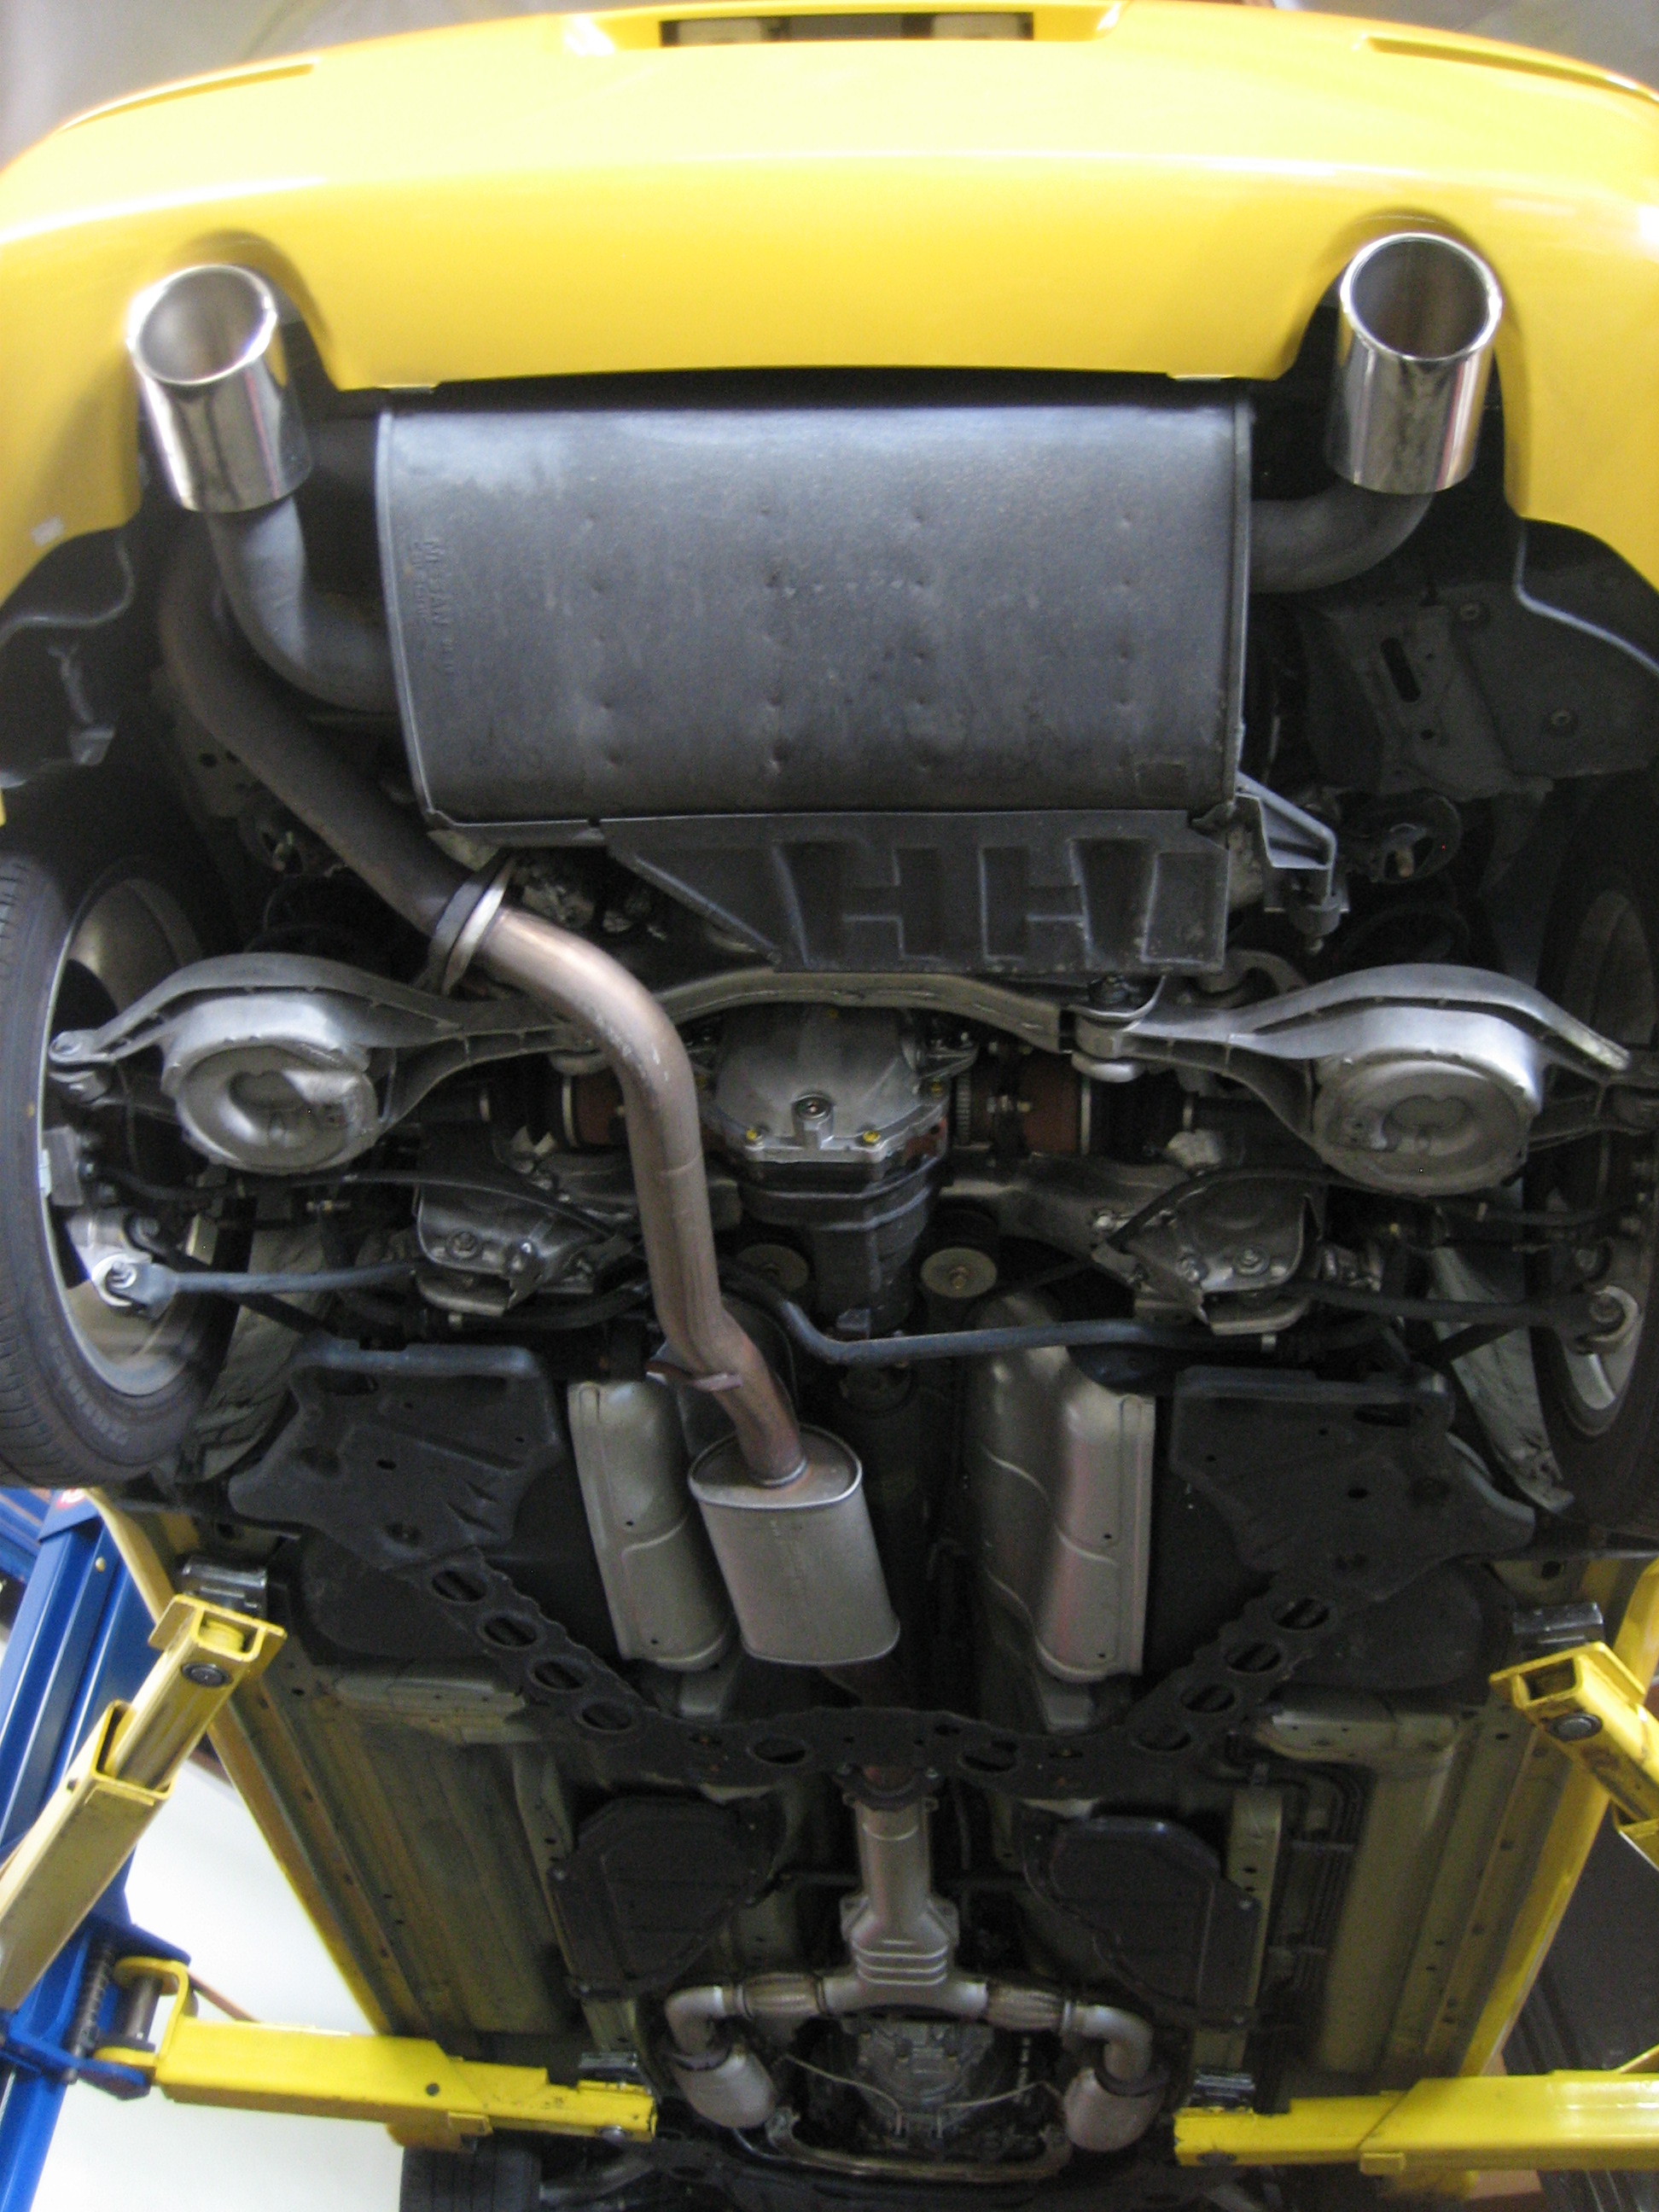 Z-Car Blog » Post Topic » UPREV’d and Exhaust’d: Tetsuya’s 350z